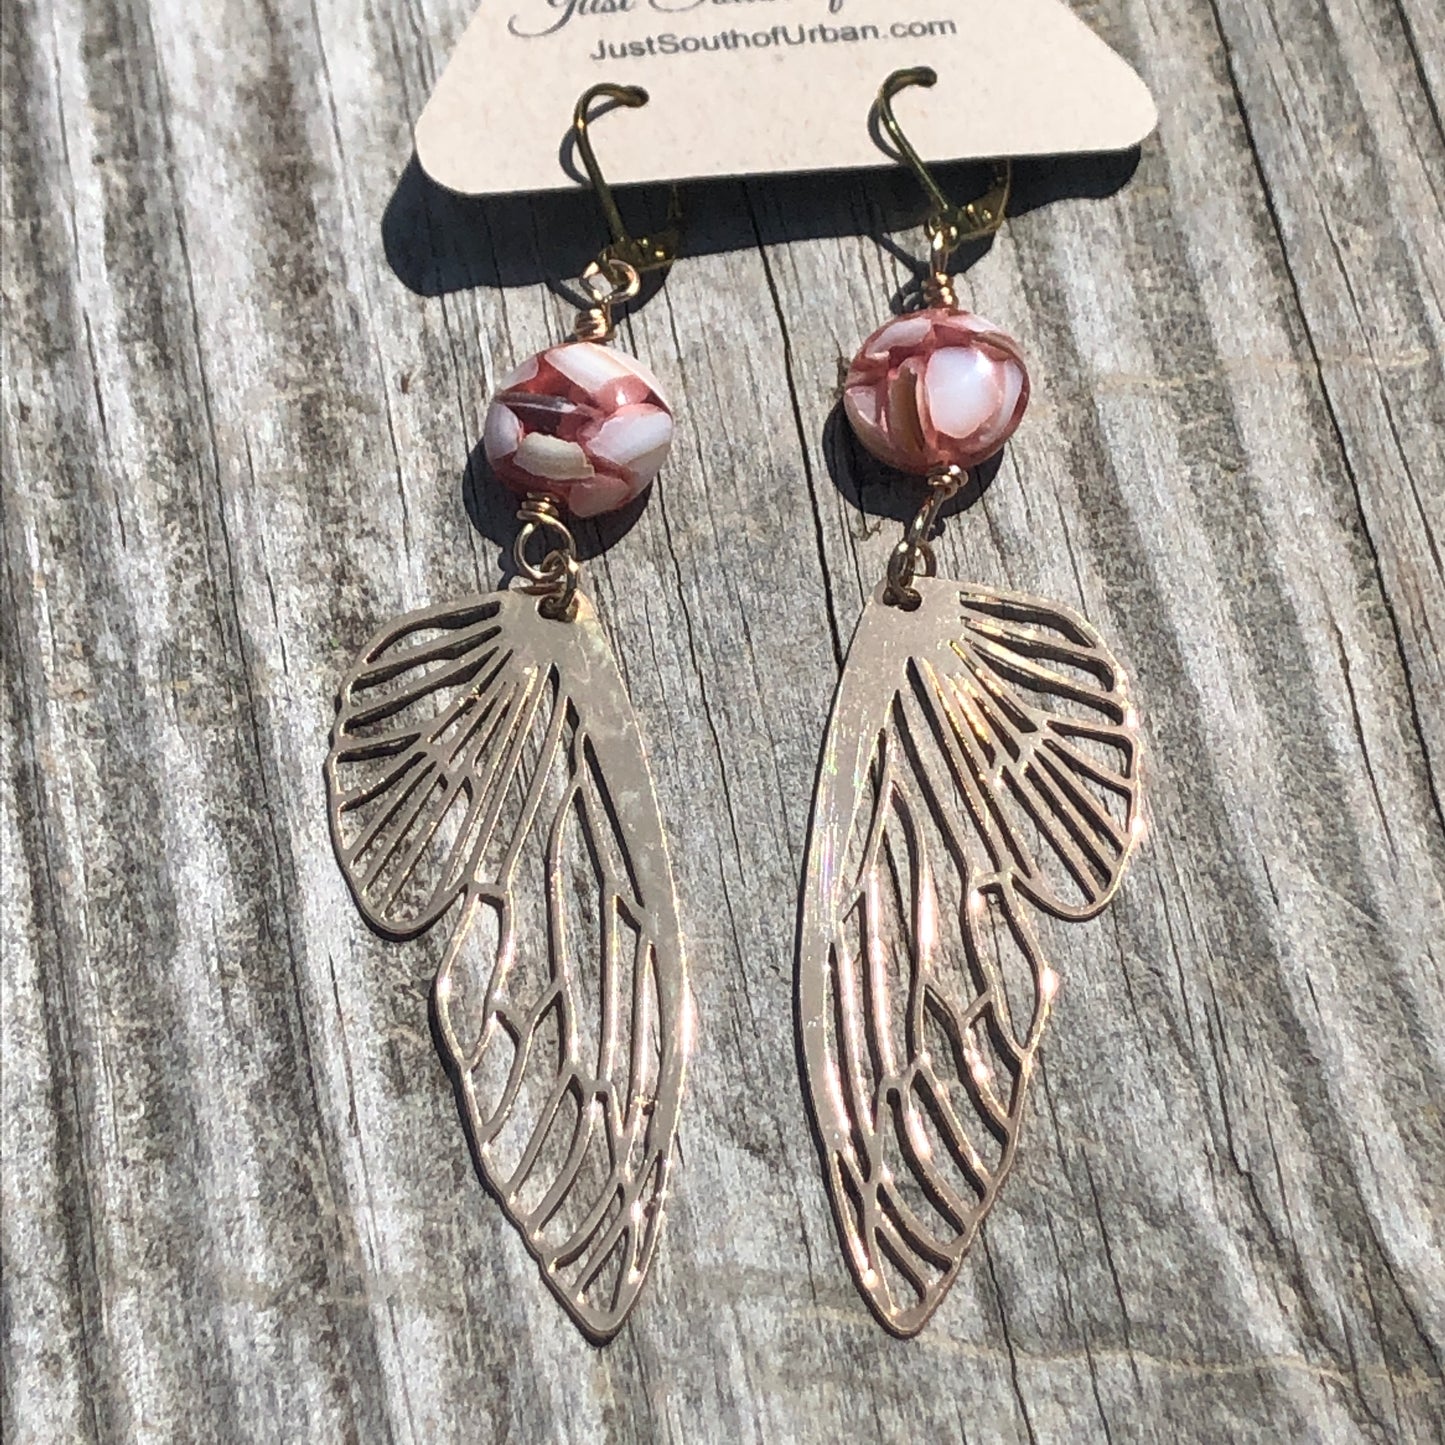 Butterfly Wing Earrings with Shell Beads